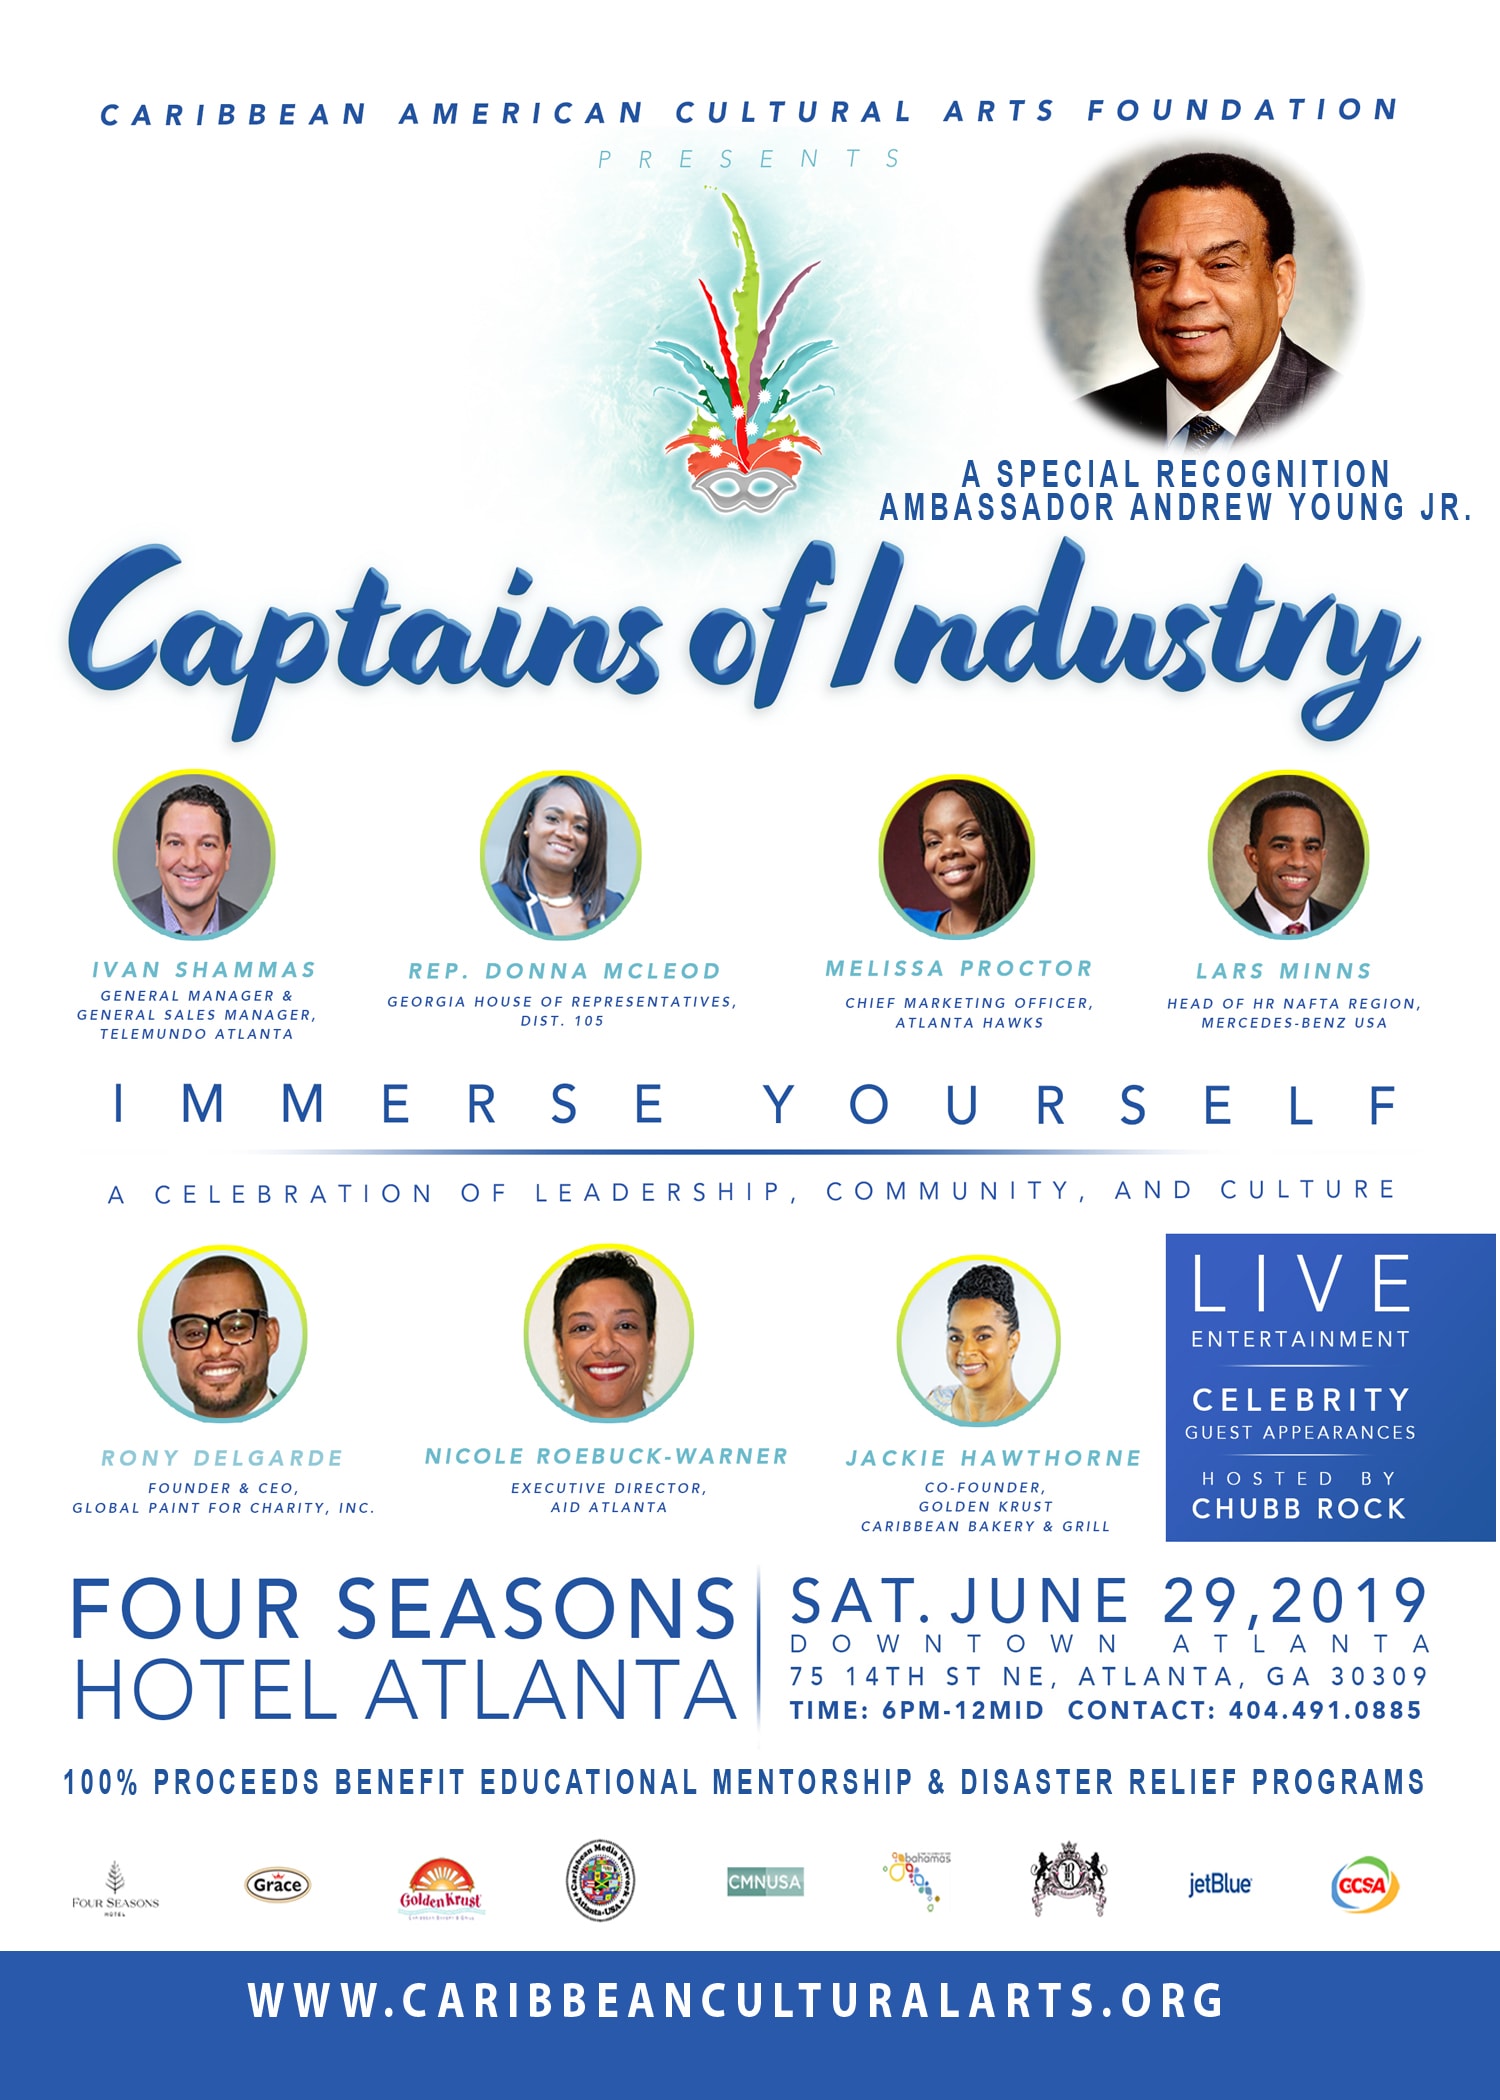 Caribbean American Cultural Arts Foundation Captains of Industry